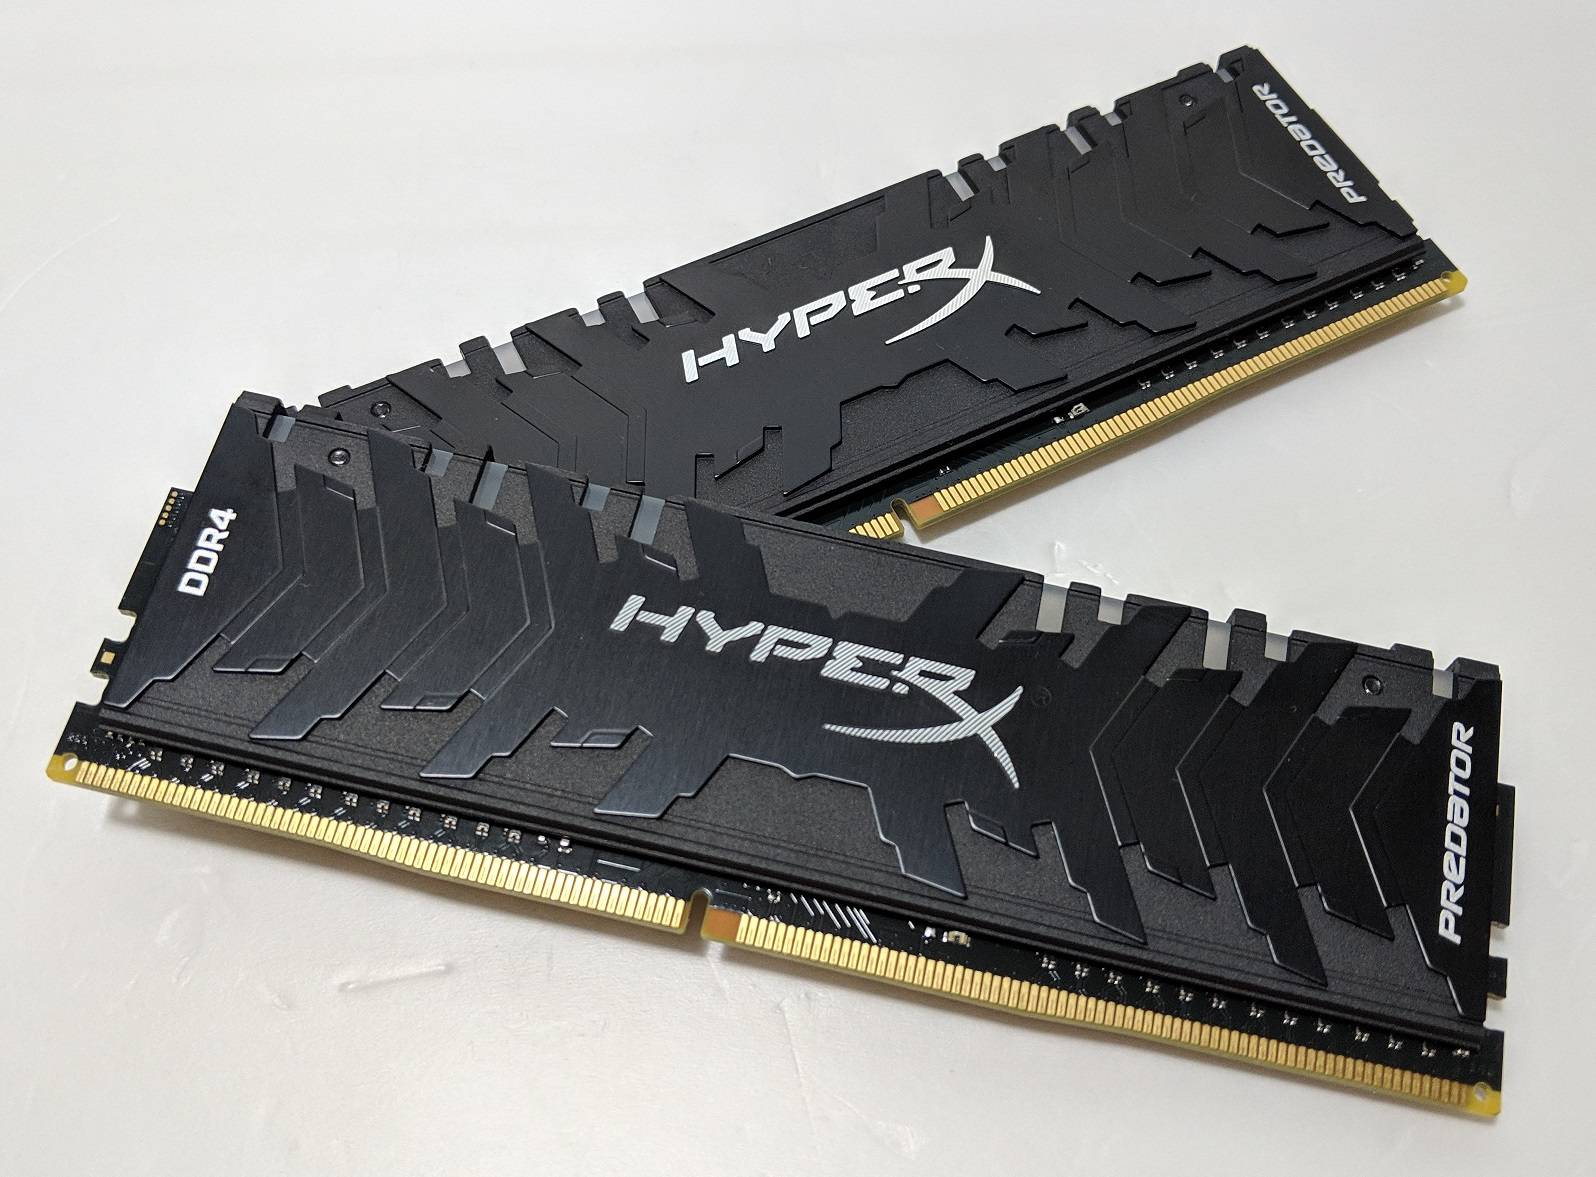 Pygmalion Acquiesce Betekenis Unboxing and Review of HyperX Predator RGB DDR4-3600 16GB Kit | UnbxTech